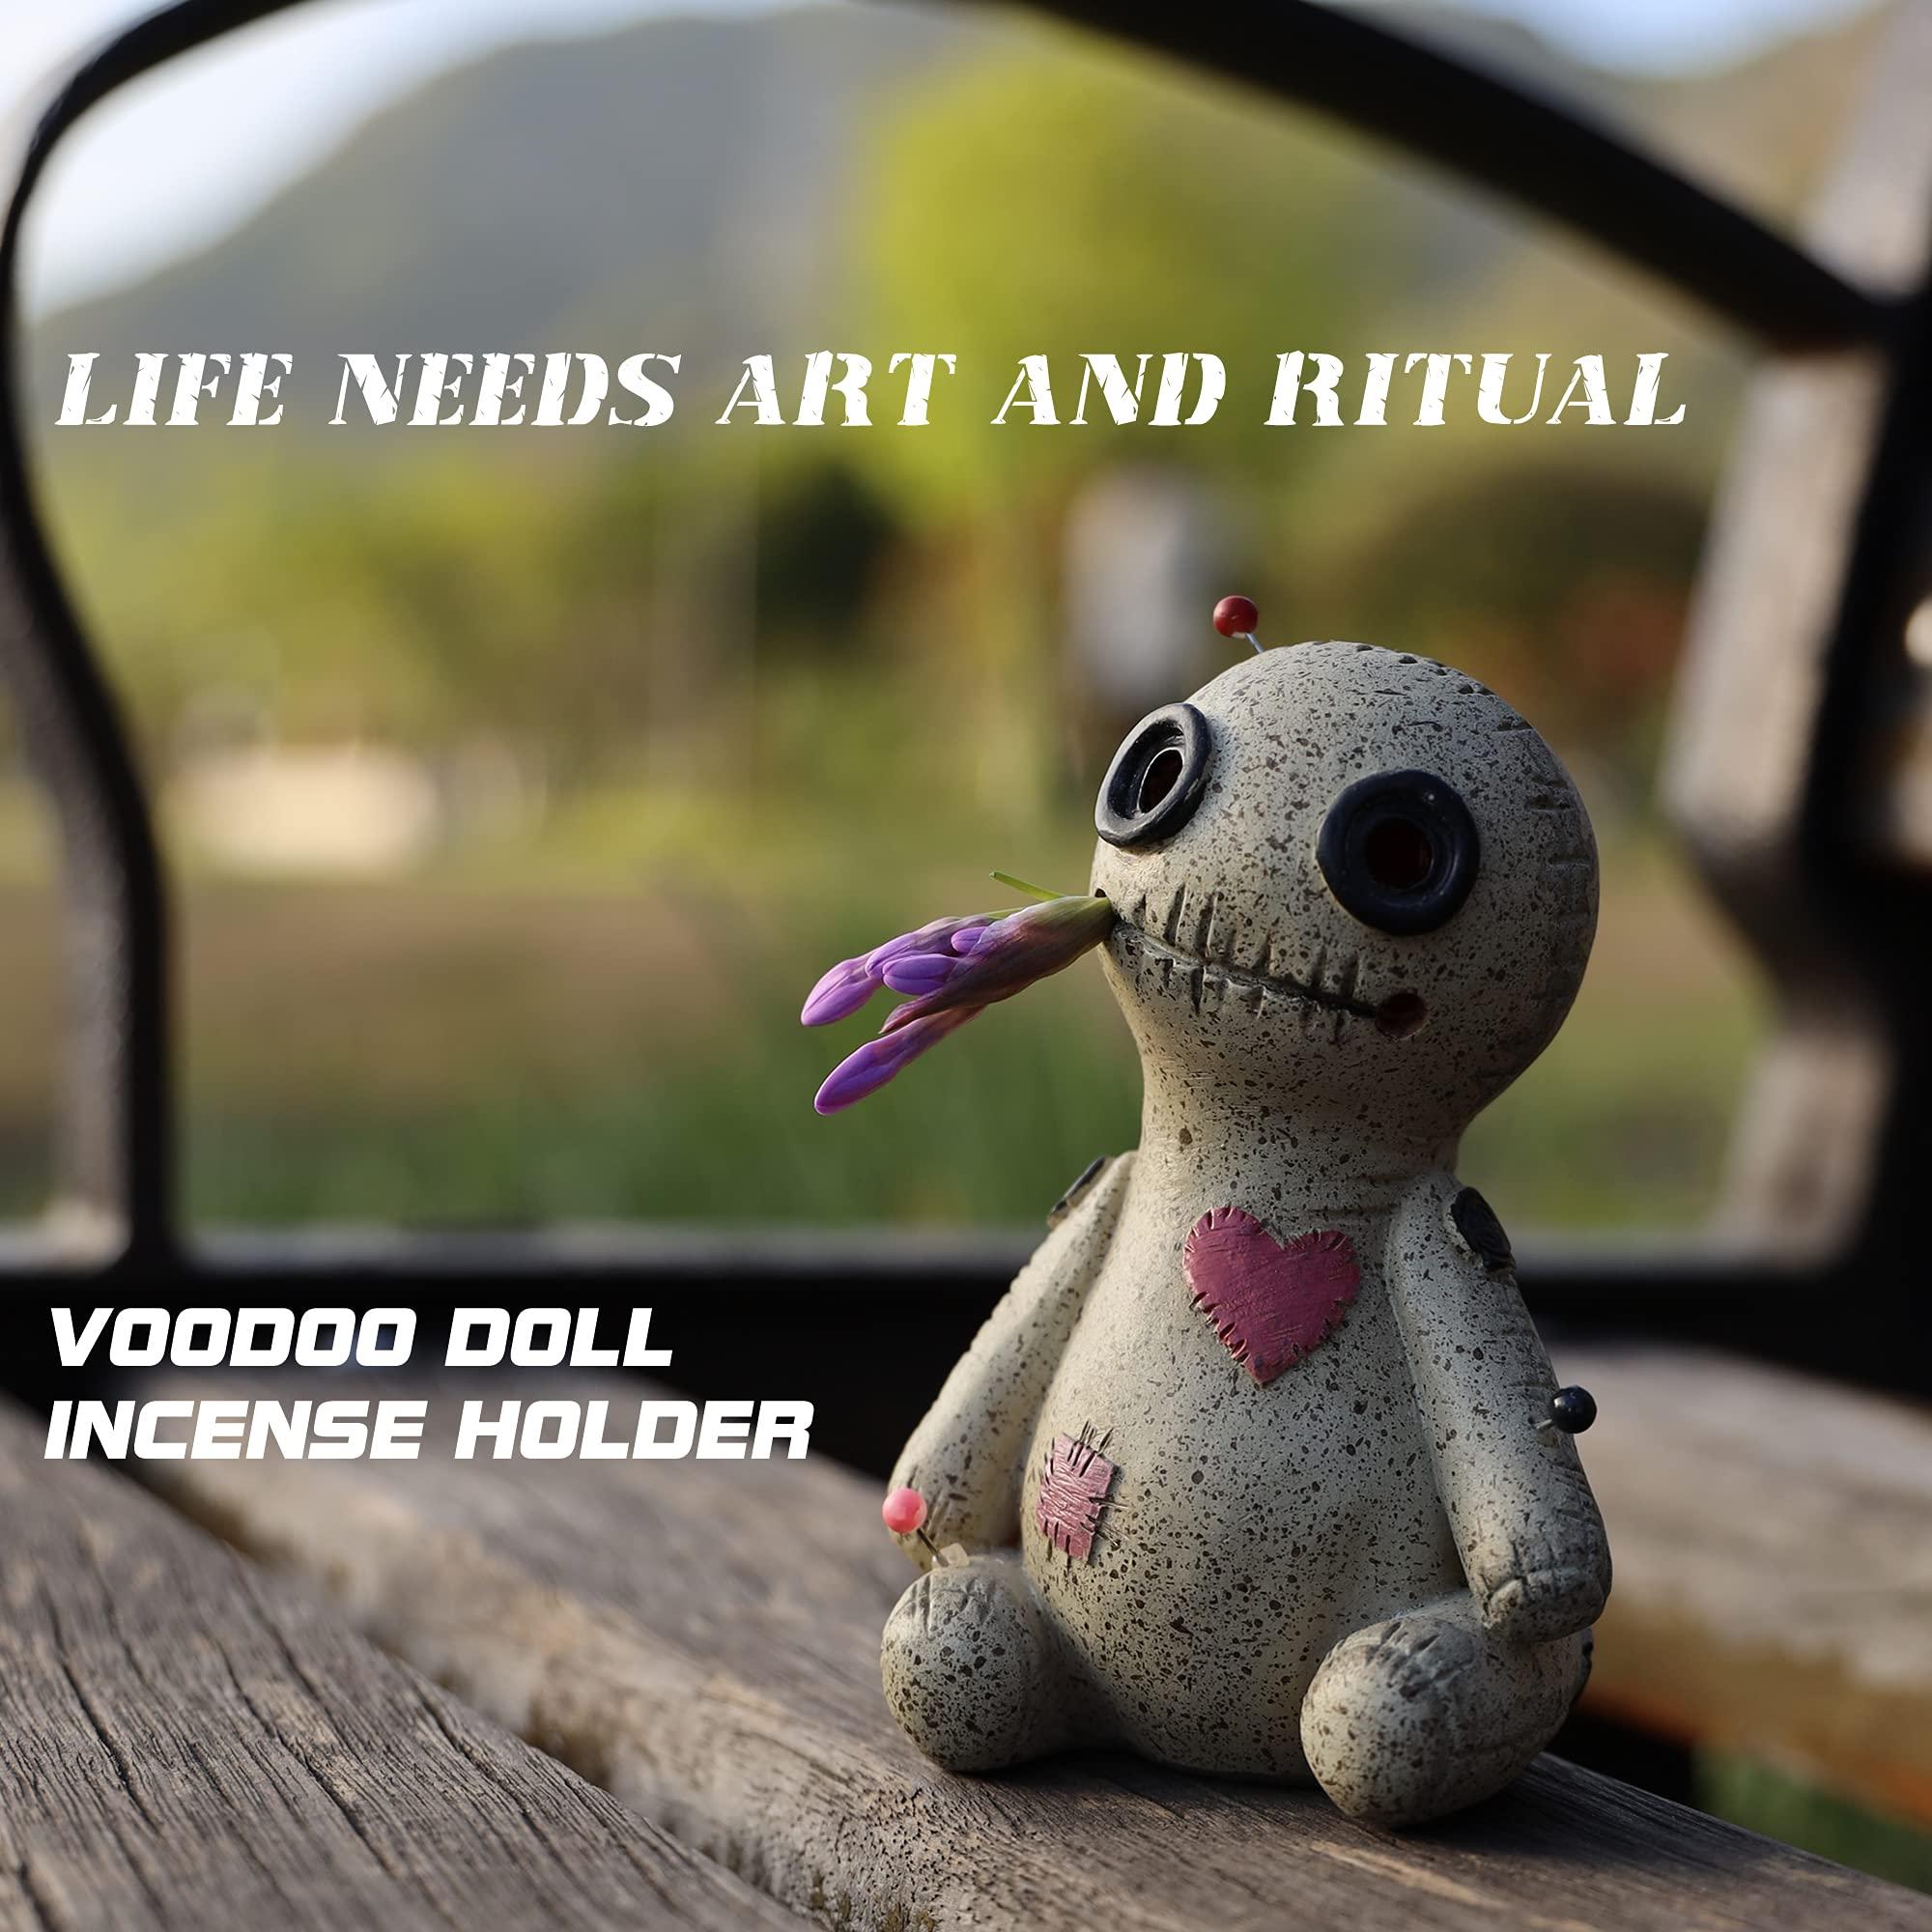 Voodoo Doll Cone Burner, Smoke Coming Out of The Eyes and Corners of The Mouth, Voodoo Doll Incense Burner Desktop Resin Ornament for Yoga Room, Ornament Handmade Craft for Home Decoration(Right) 3